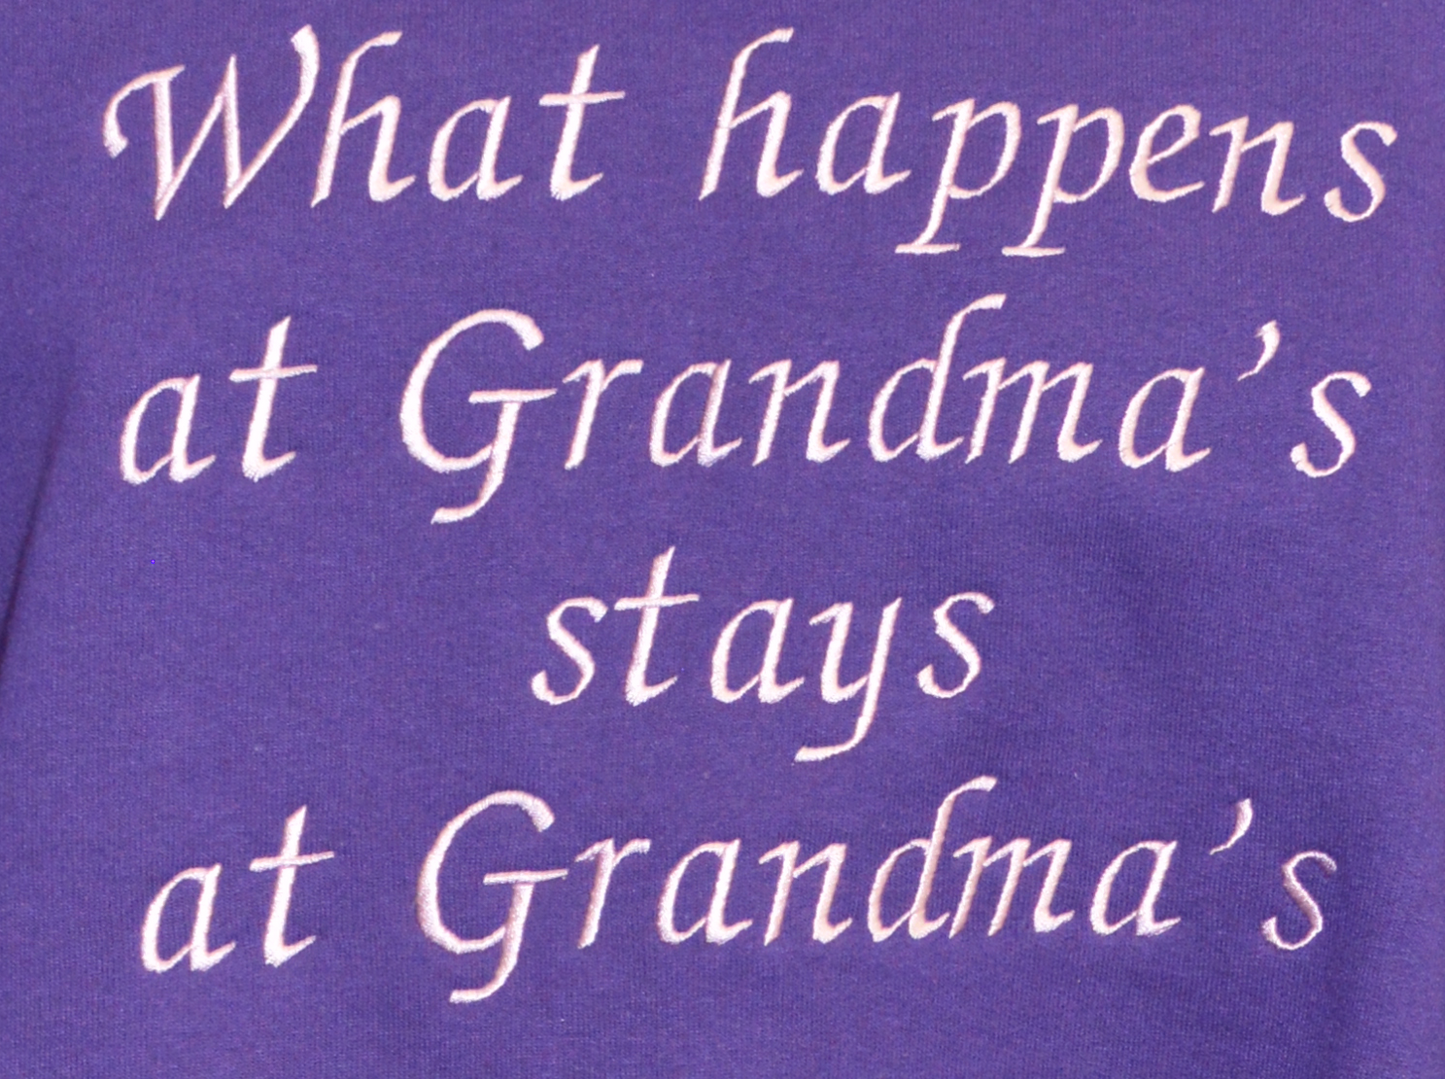 Embroidered Crew Sweatshirt: "What Happens At Grandma" - FREE SHIPPING